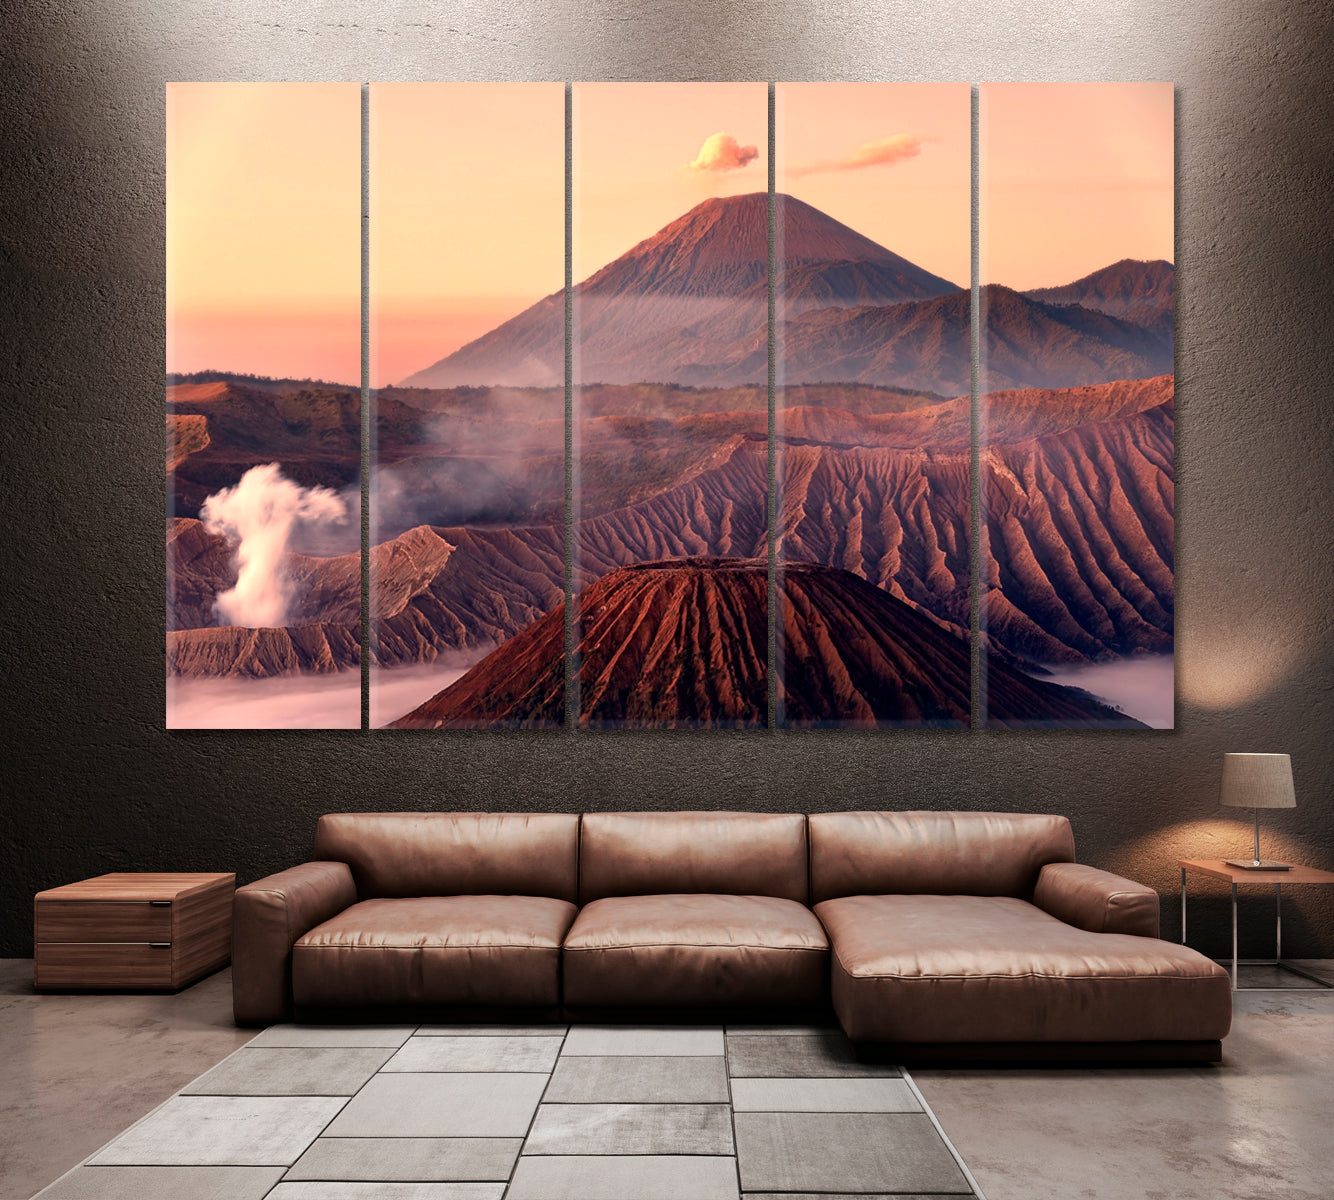 Mount Bromo Indonesia Canvas Print ArtLexy 5 Panels 36"x24" inches 